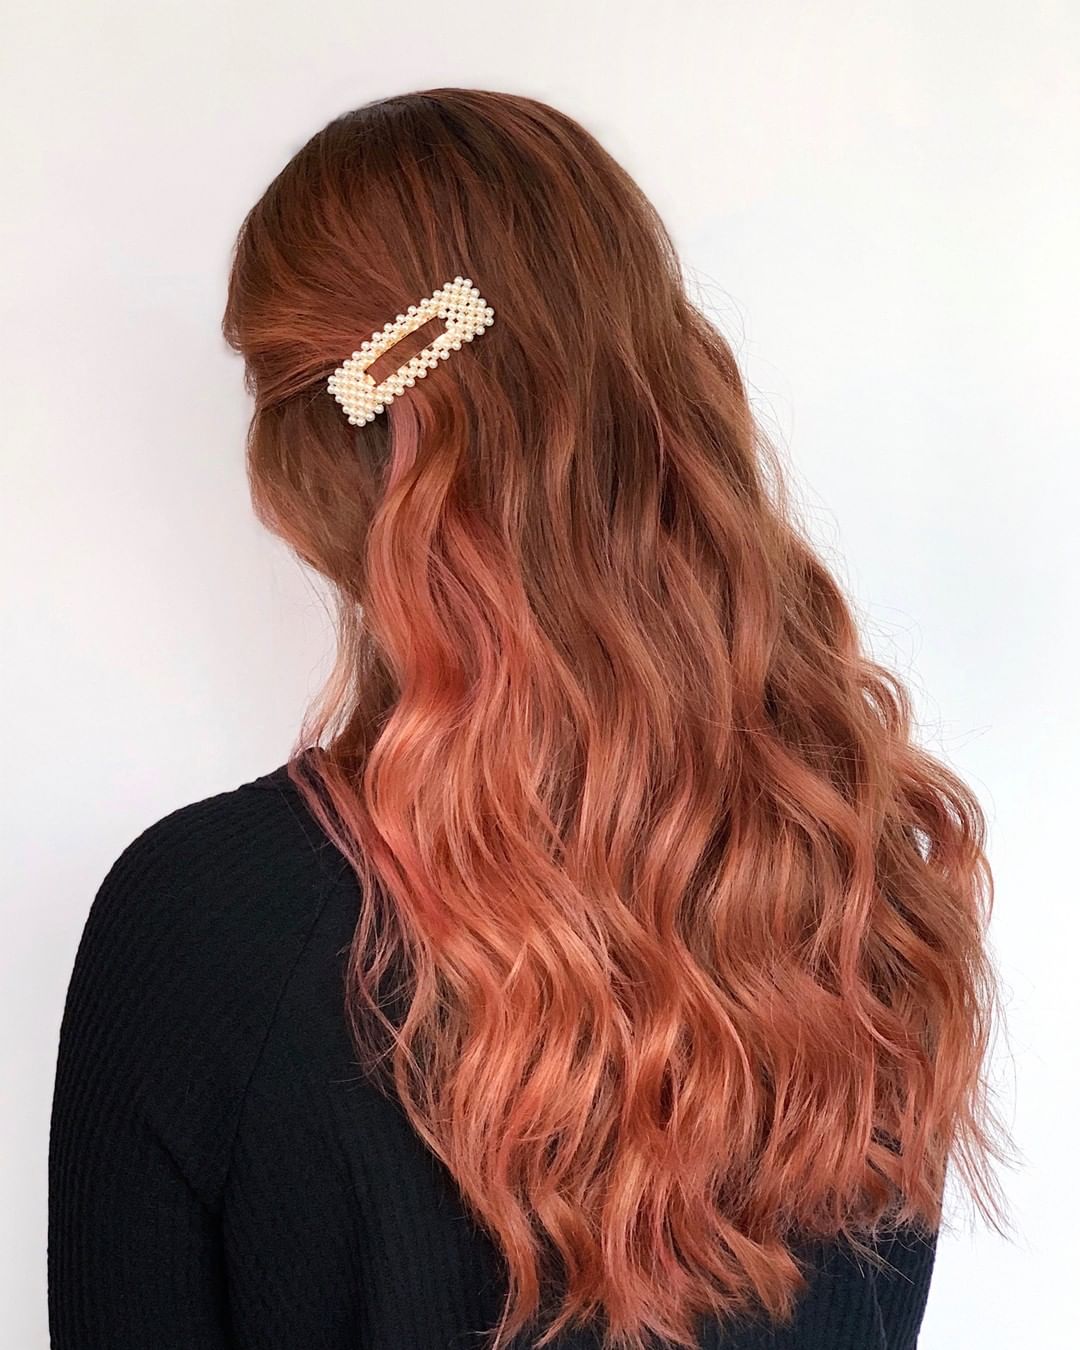 11 Adorable Fall Hair Color Trends To Experiment With In 2020,60th Wedding Anniversary Gifts For Parents